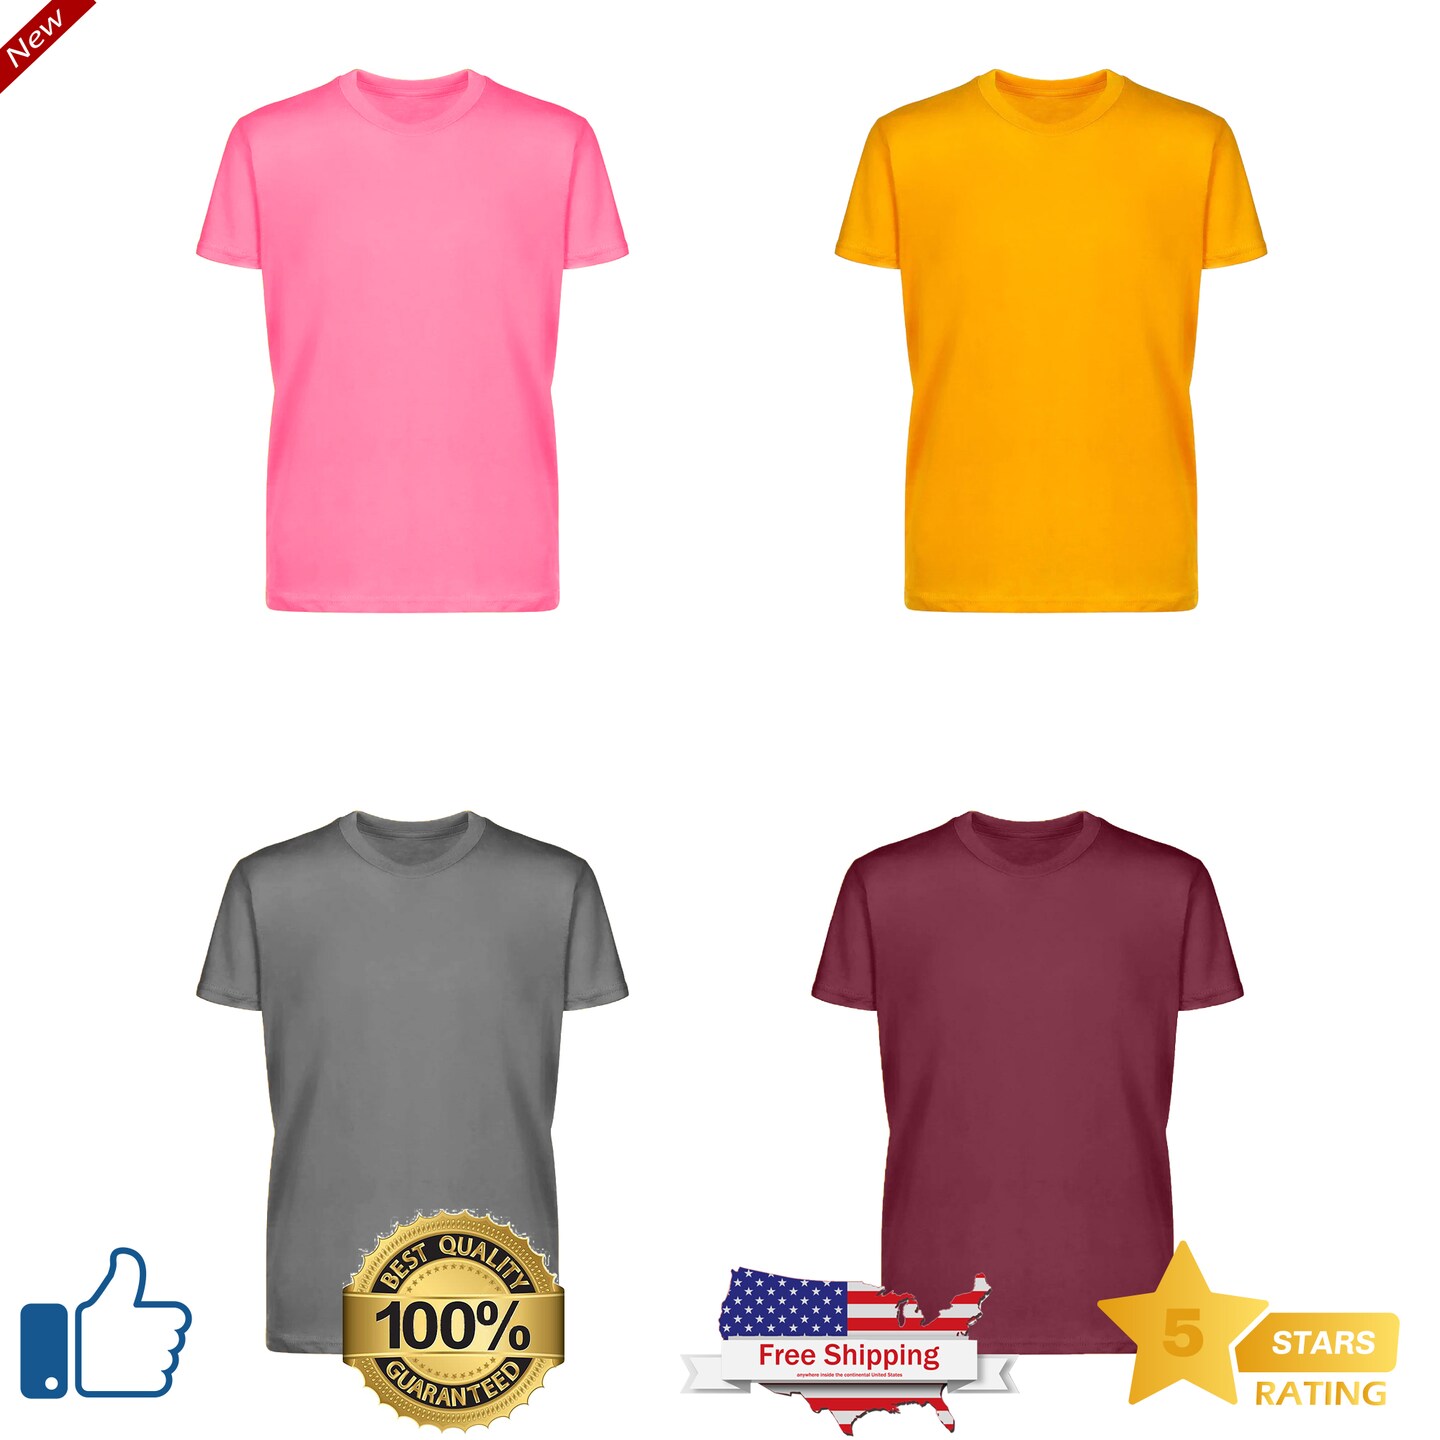 Kids Pack size T-shirts - 100% Cotton Short Sleeve T-shirts, Cool and Cute  T-shirts for Fashion-Forward Kids - Summer Tees, RADYAN®